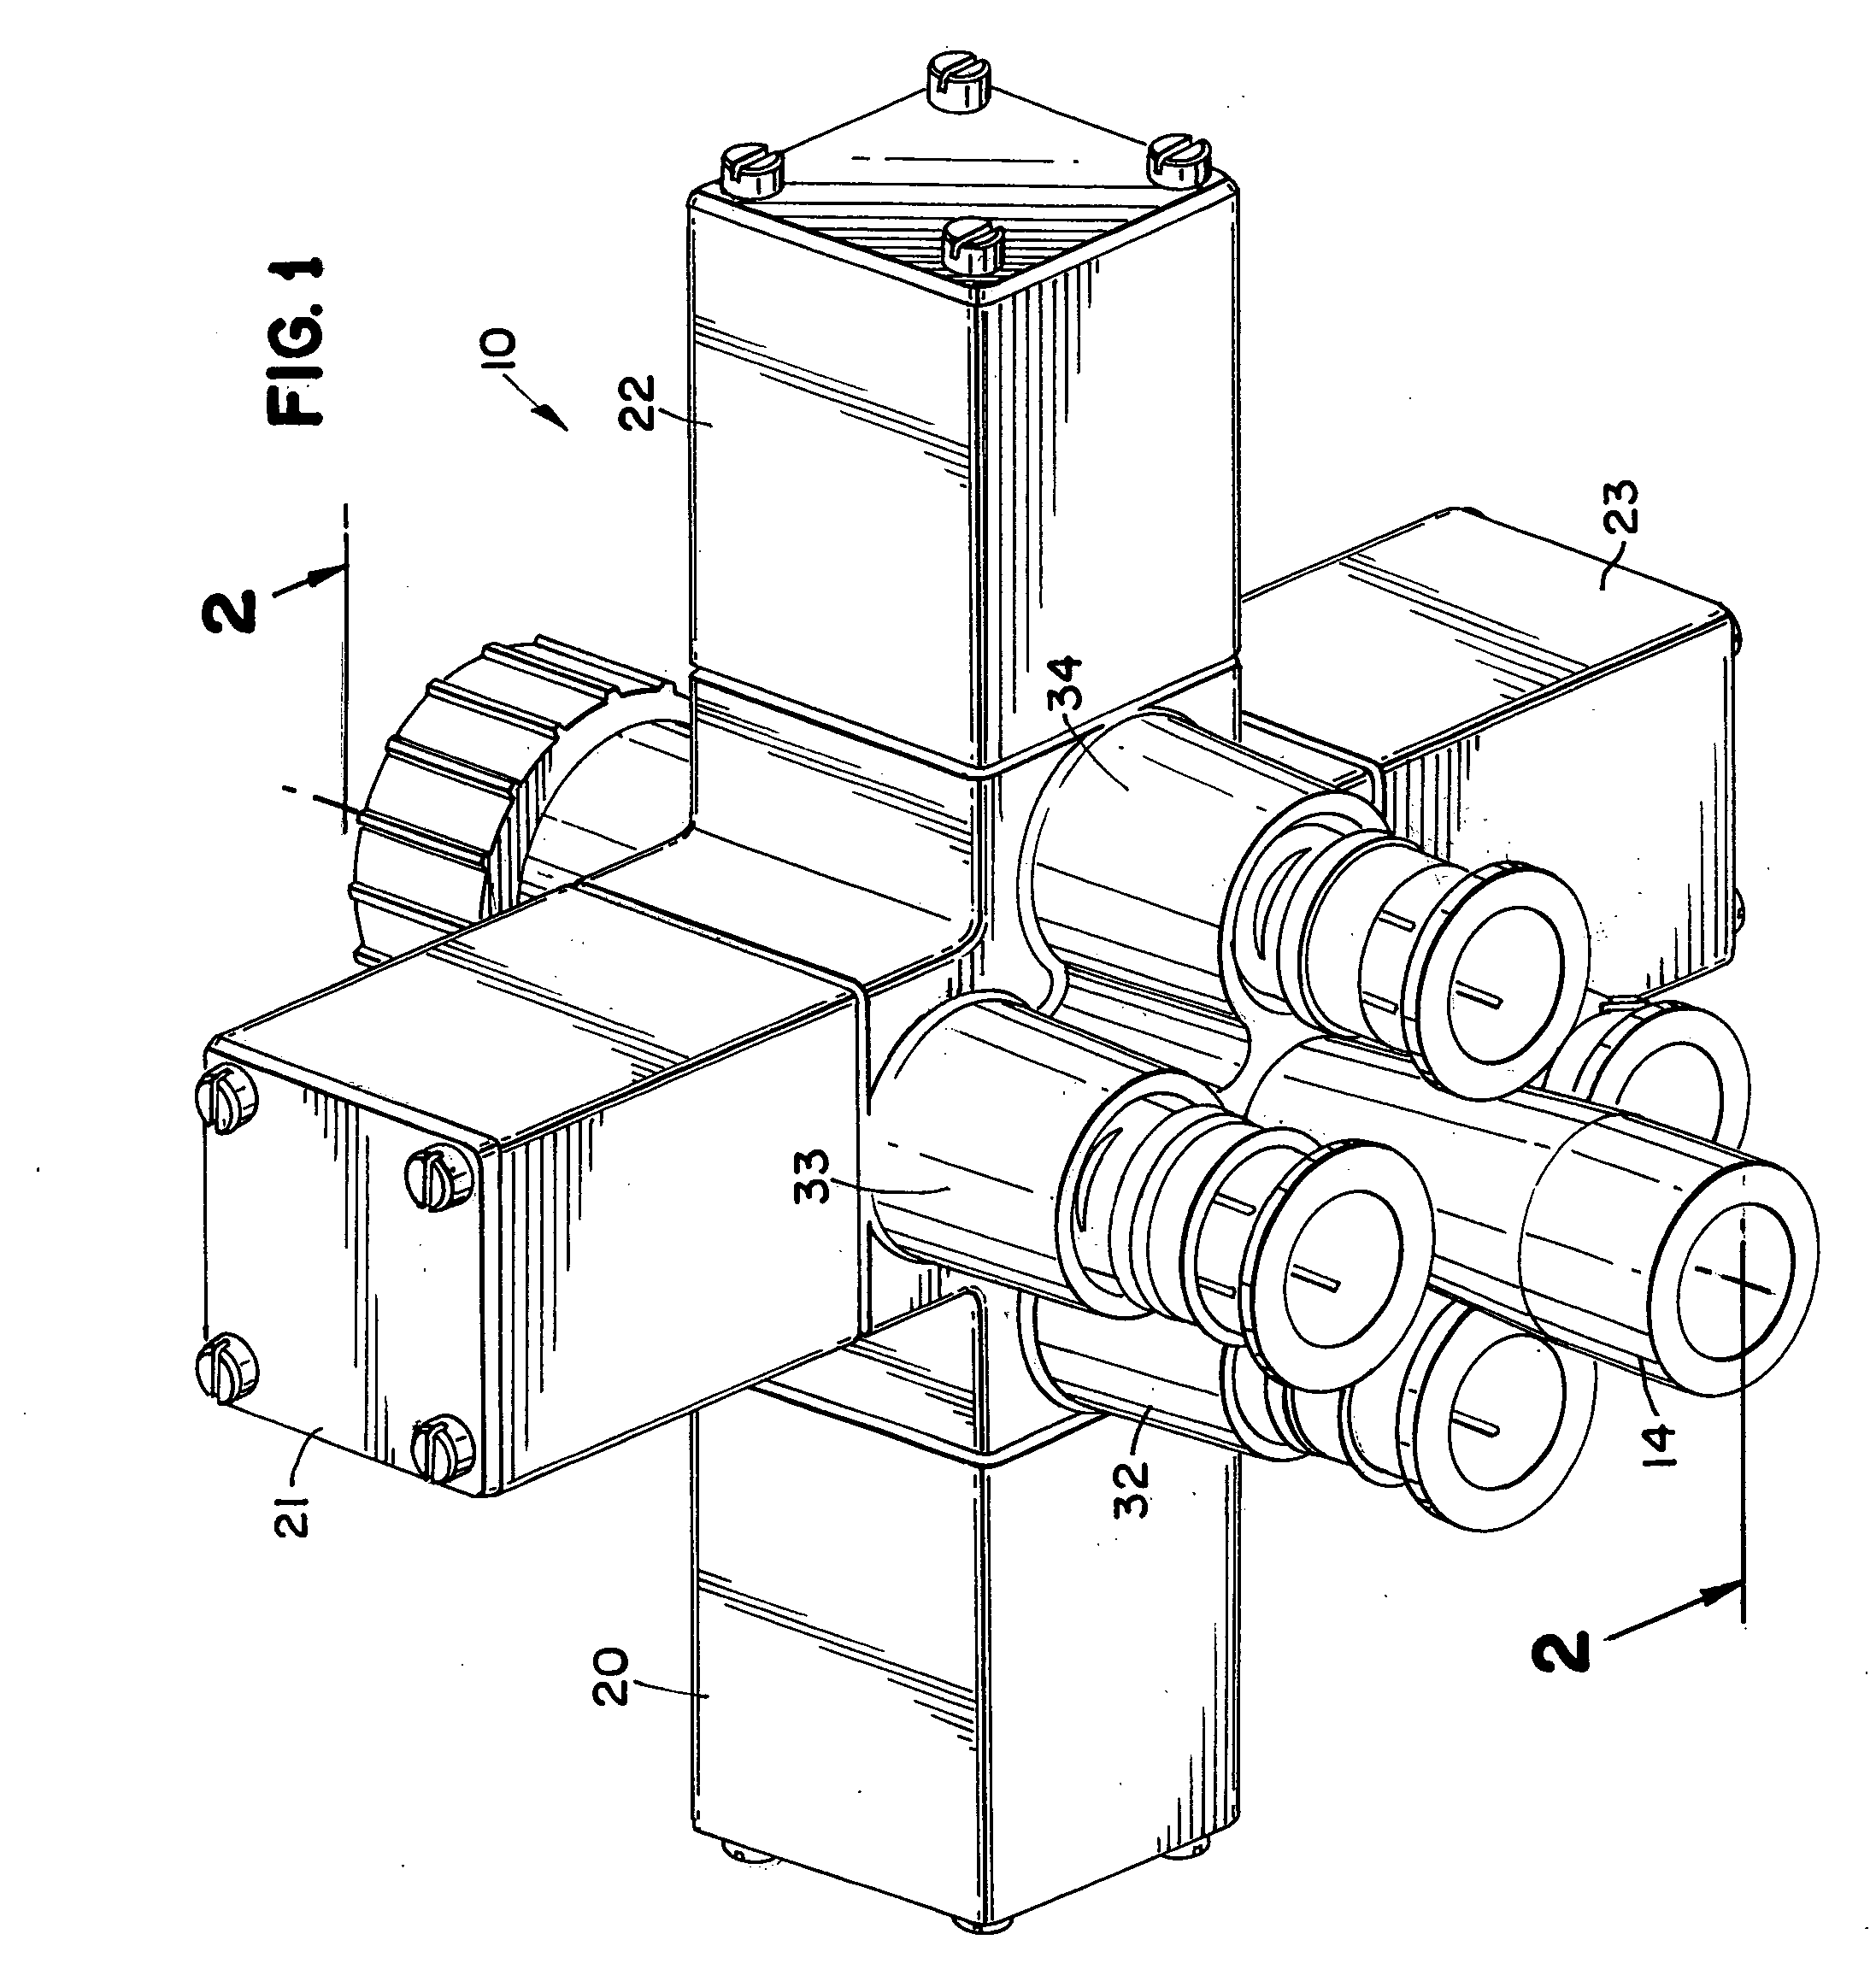 Method and apparatus for dispensing a use solution